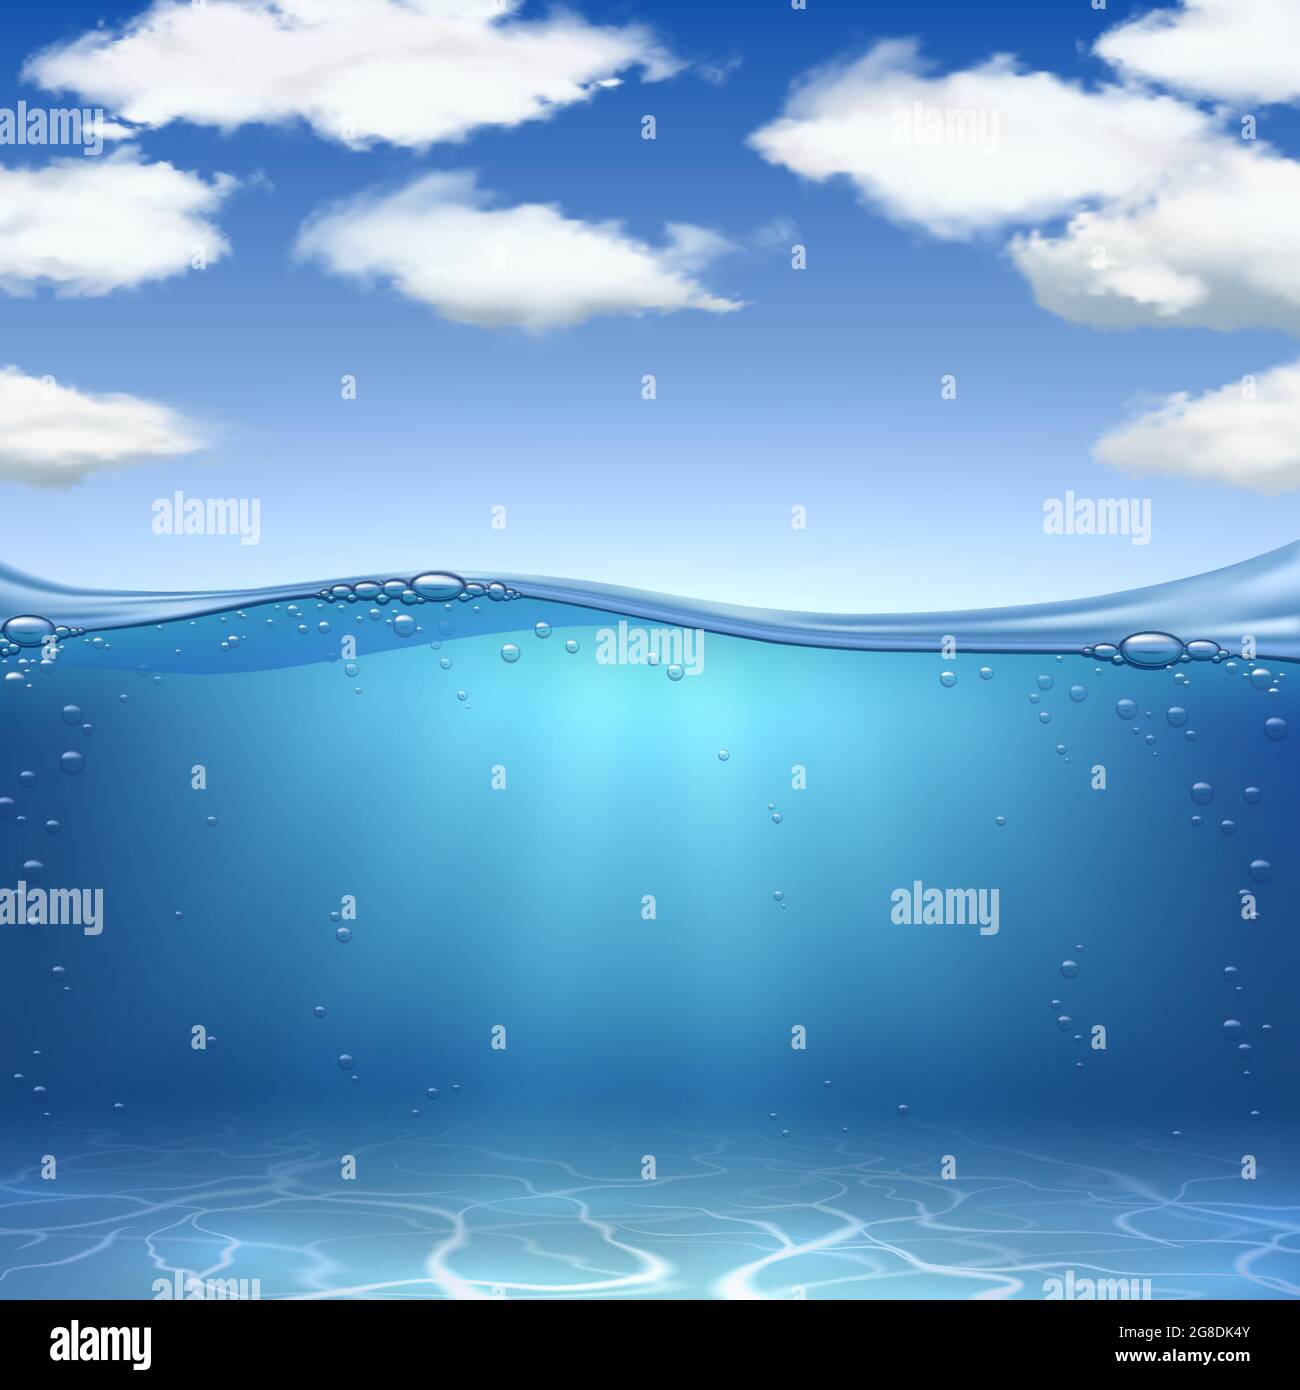 Sea waves and bottom. Realistic ocean underwater sand, water with air bubbles and blue sky with clouds. Marine landscape vector background Stock Vector